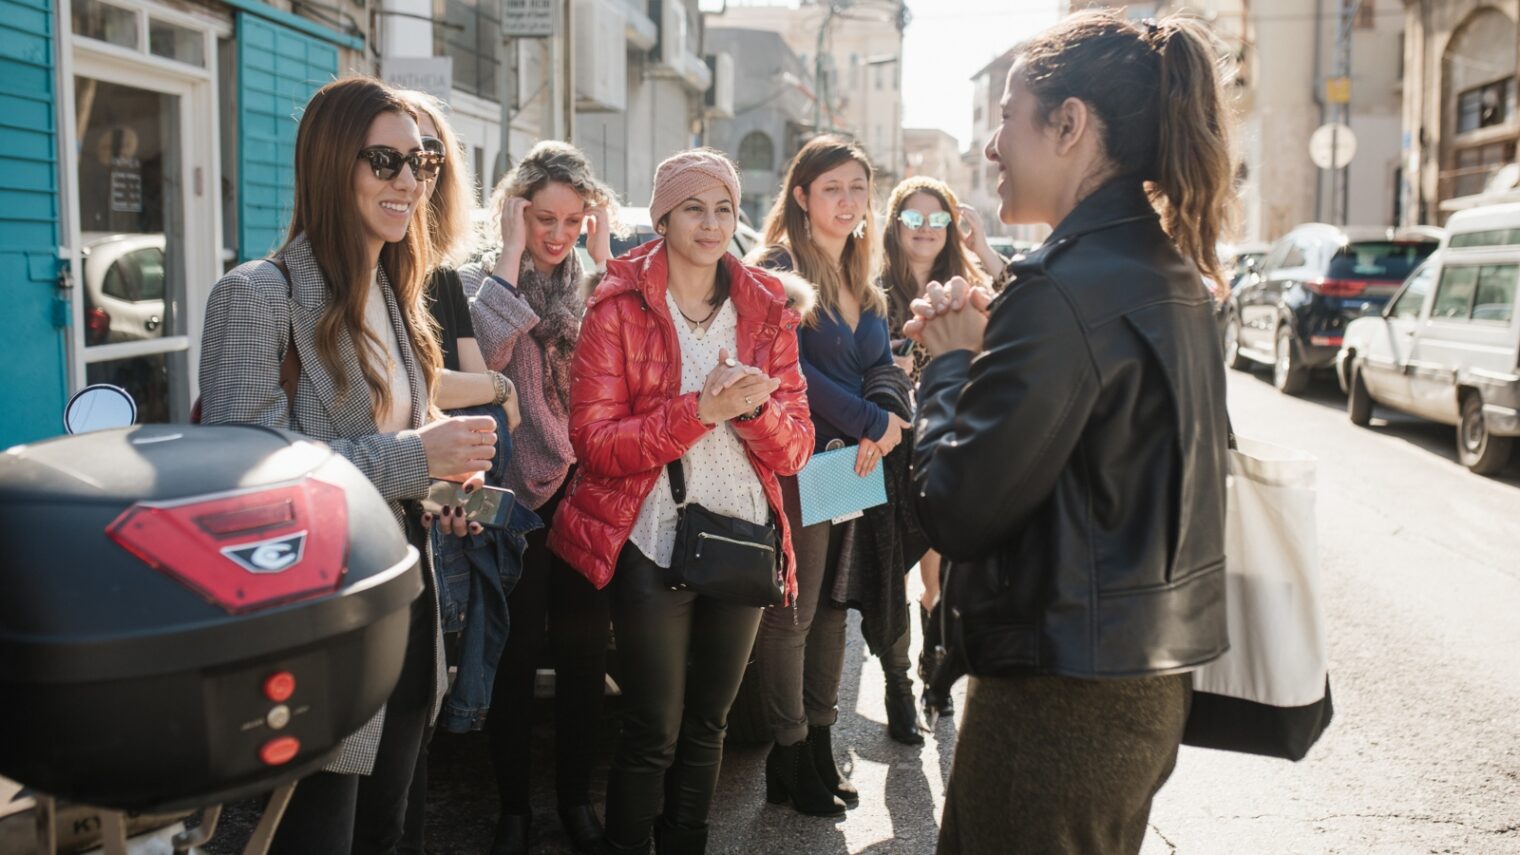 Liraz Cohen, right, leading a Fashionating by Liri tour in the Jaffa district of Tel Aviv. Photo by Shany Reich